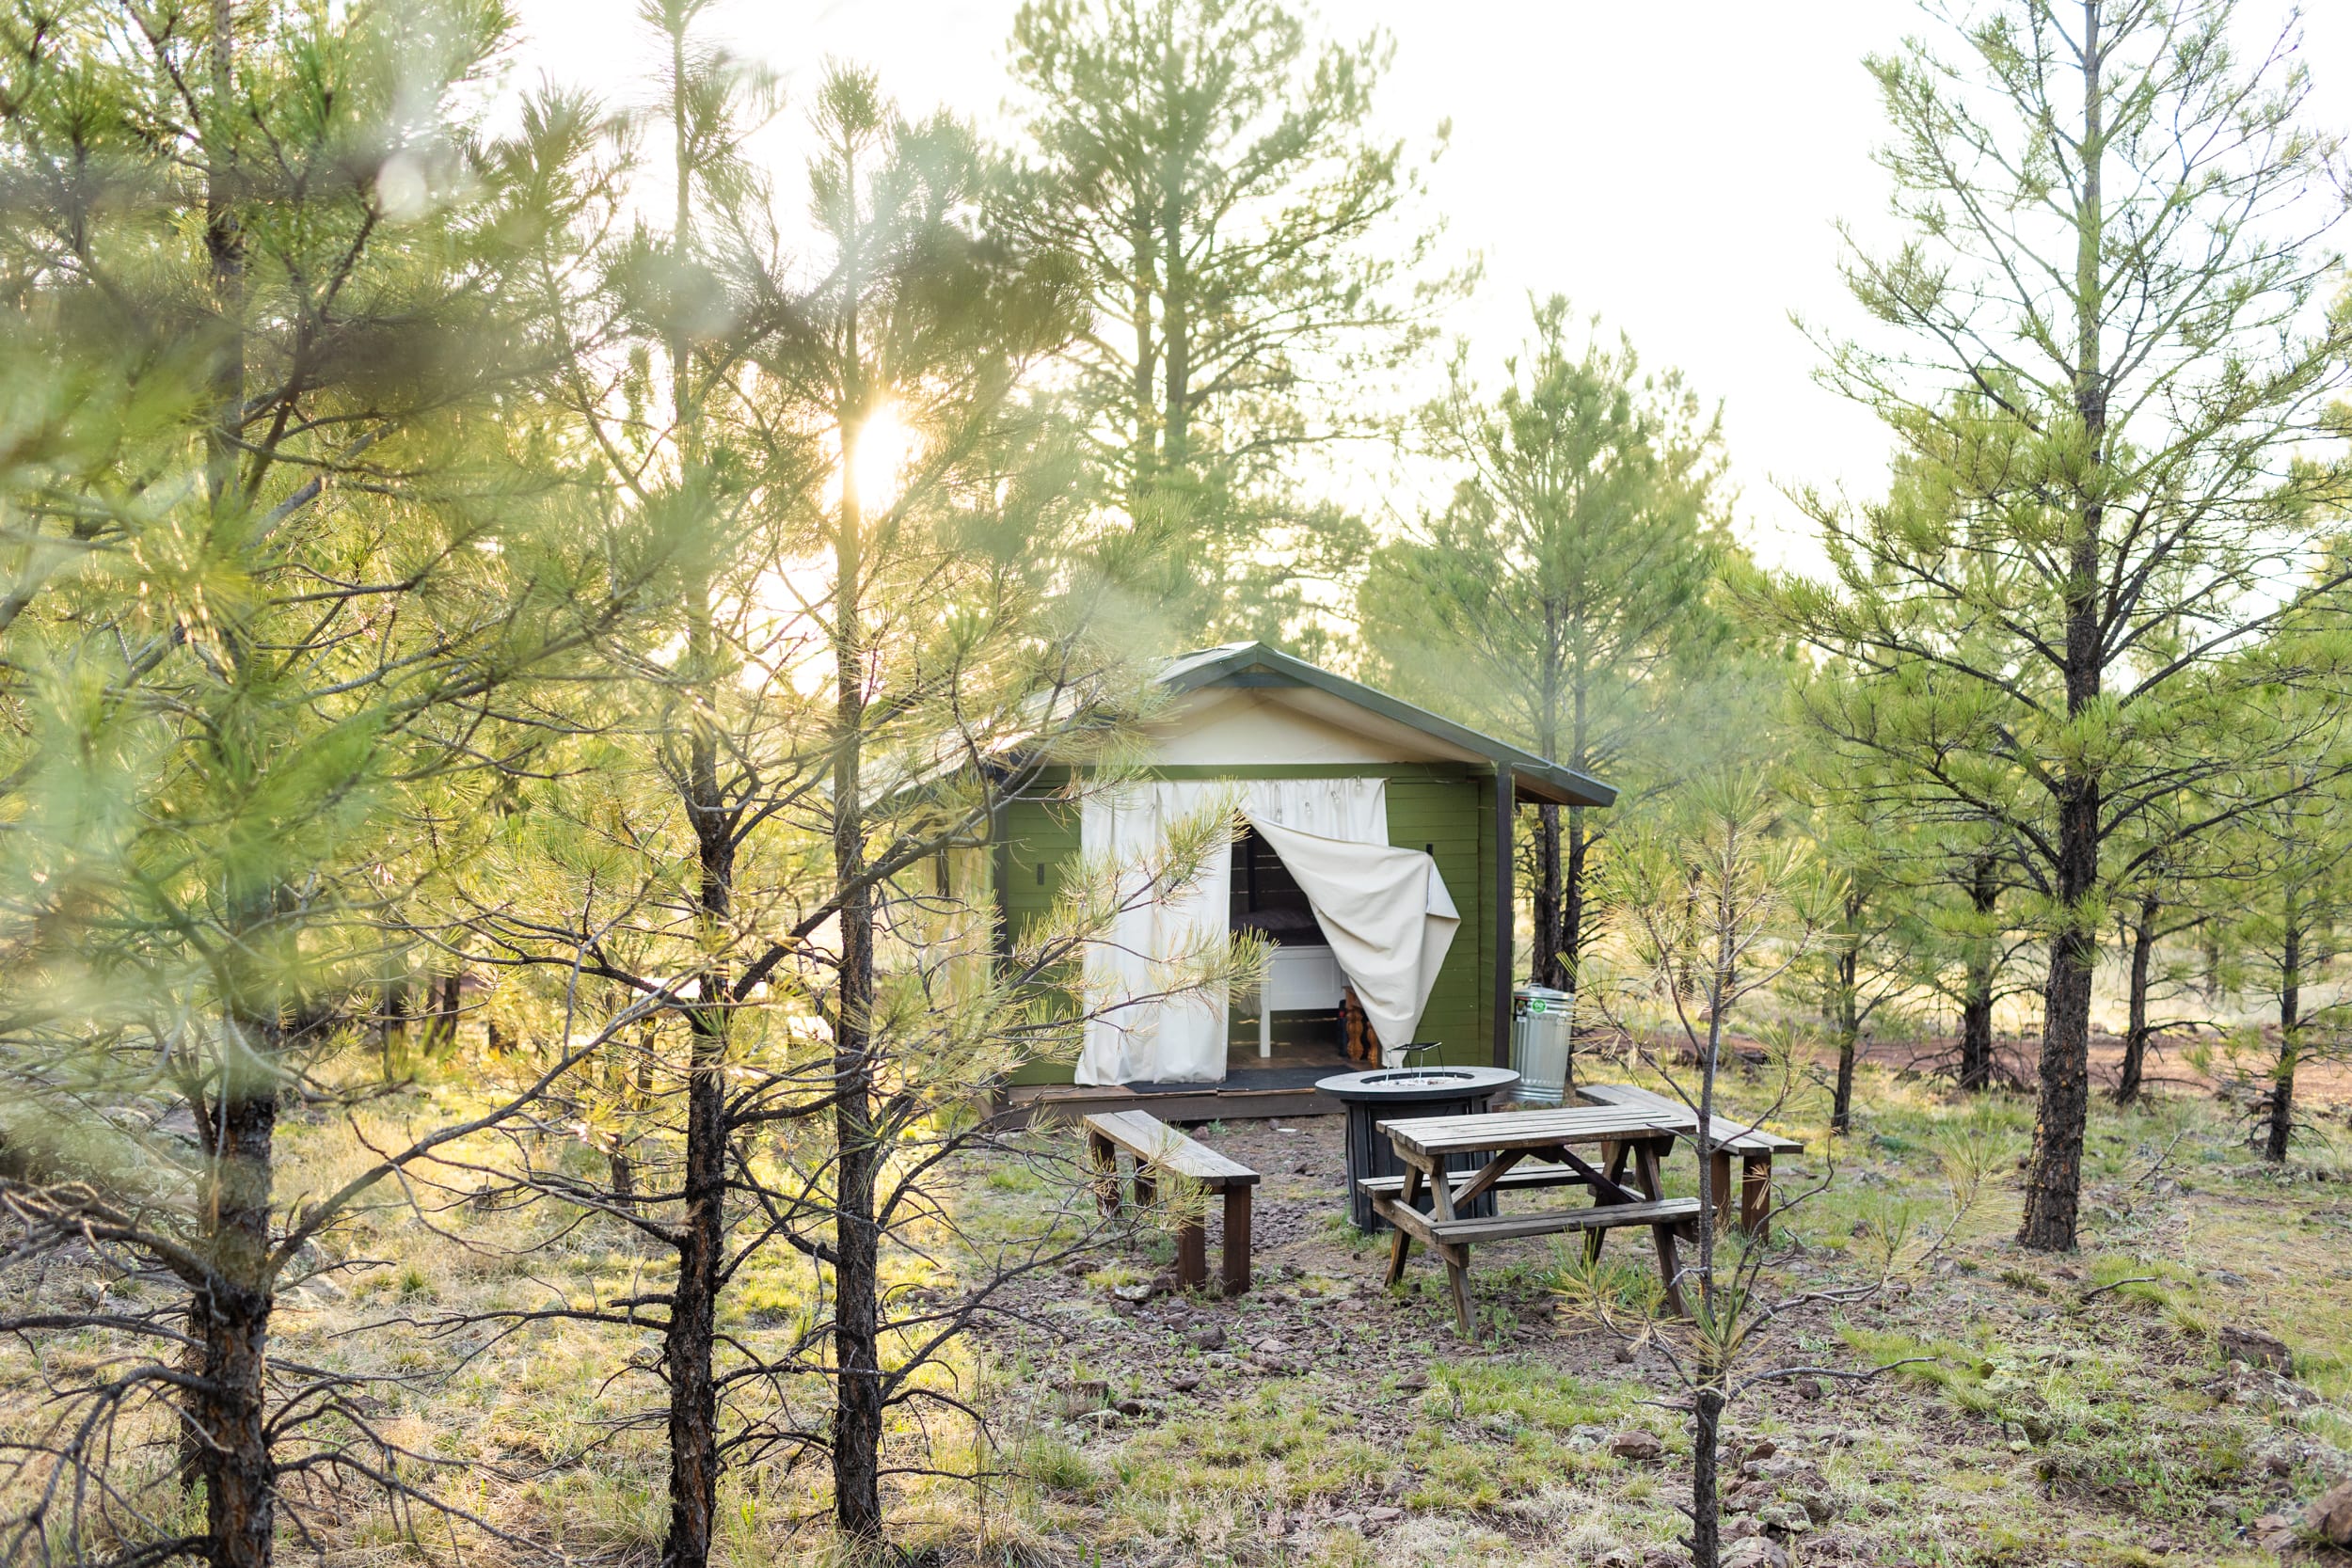 100% Off Grid Forest Glamping Cabin